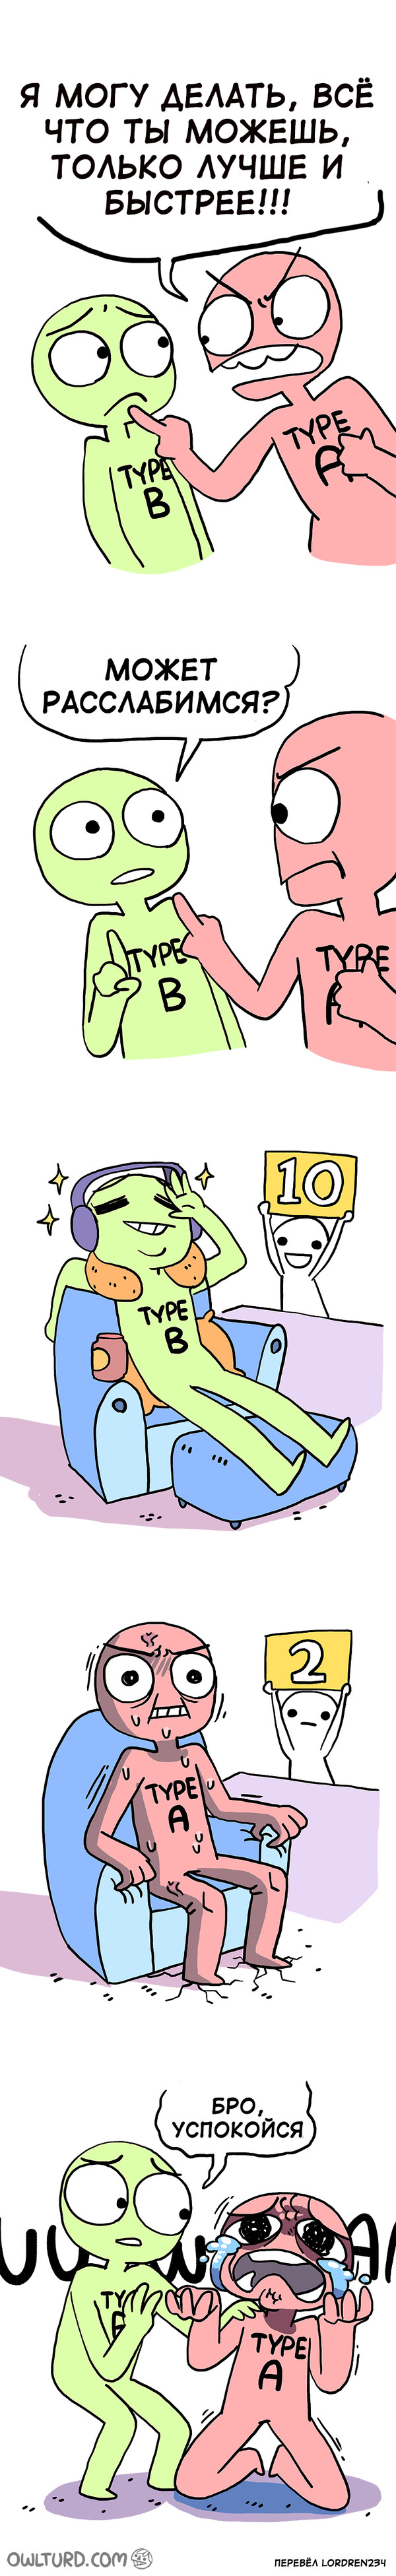 I meant just calm down - Owlturd, Comics, Translation, Humor, Friends, Relax, Longpost, Relaxation